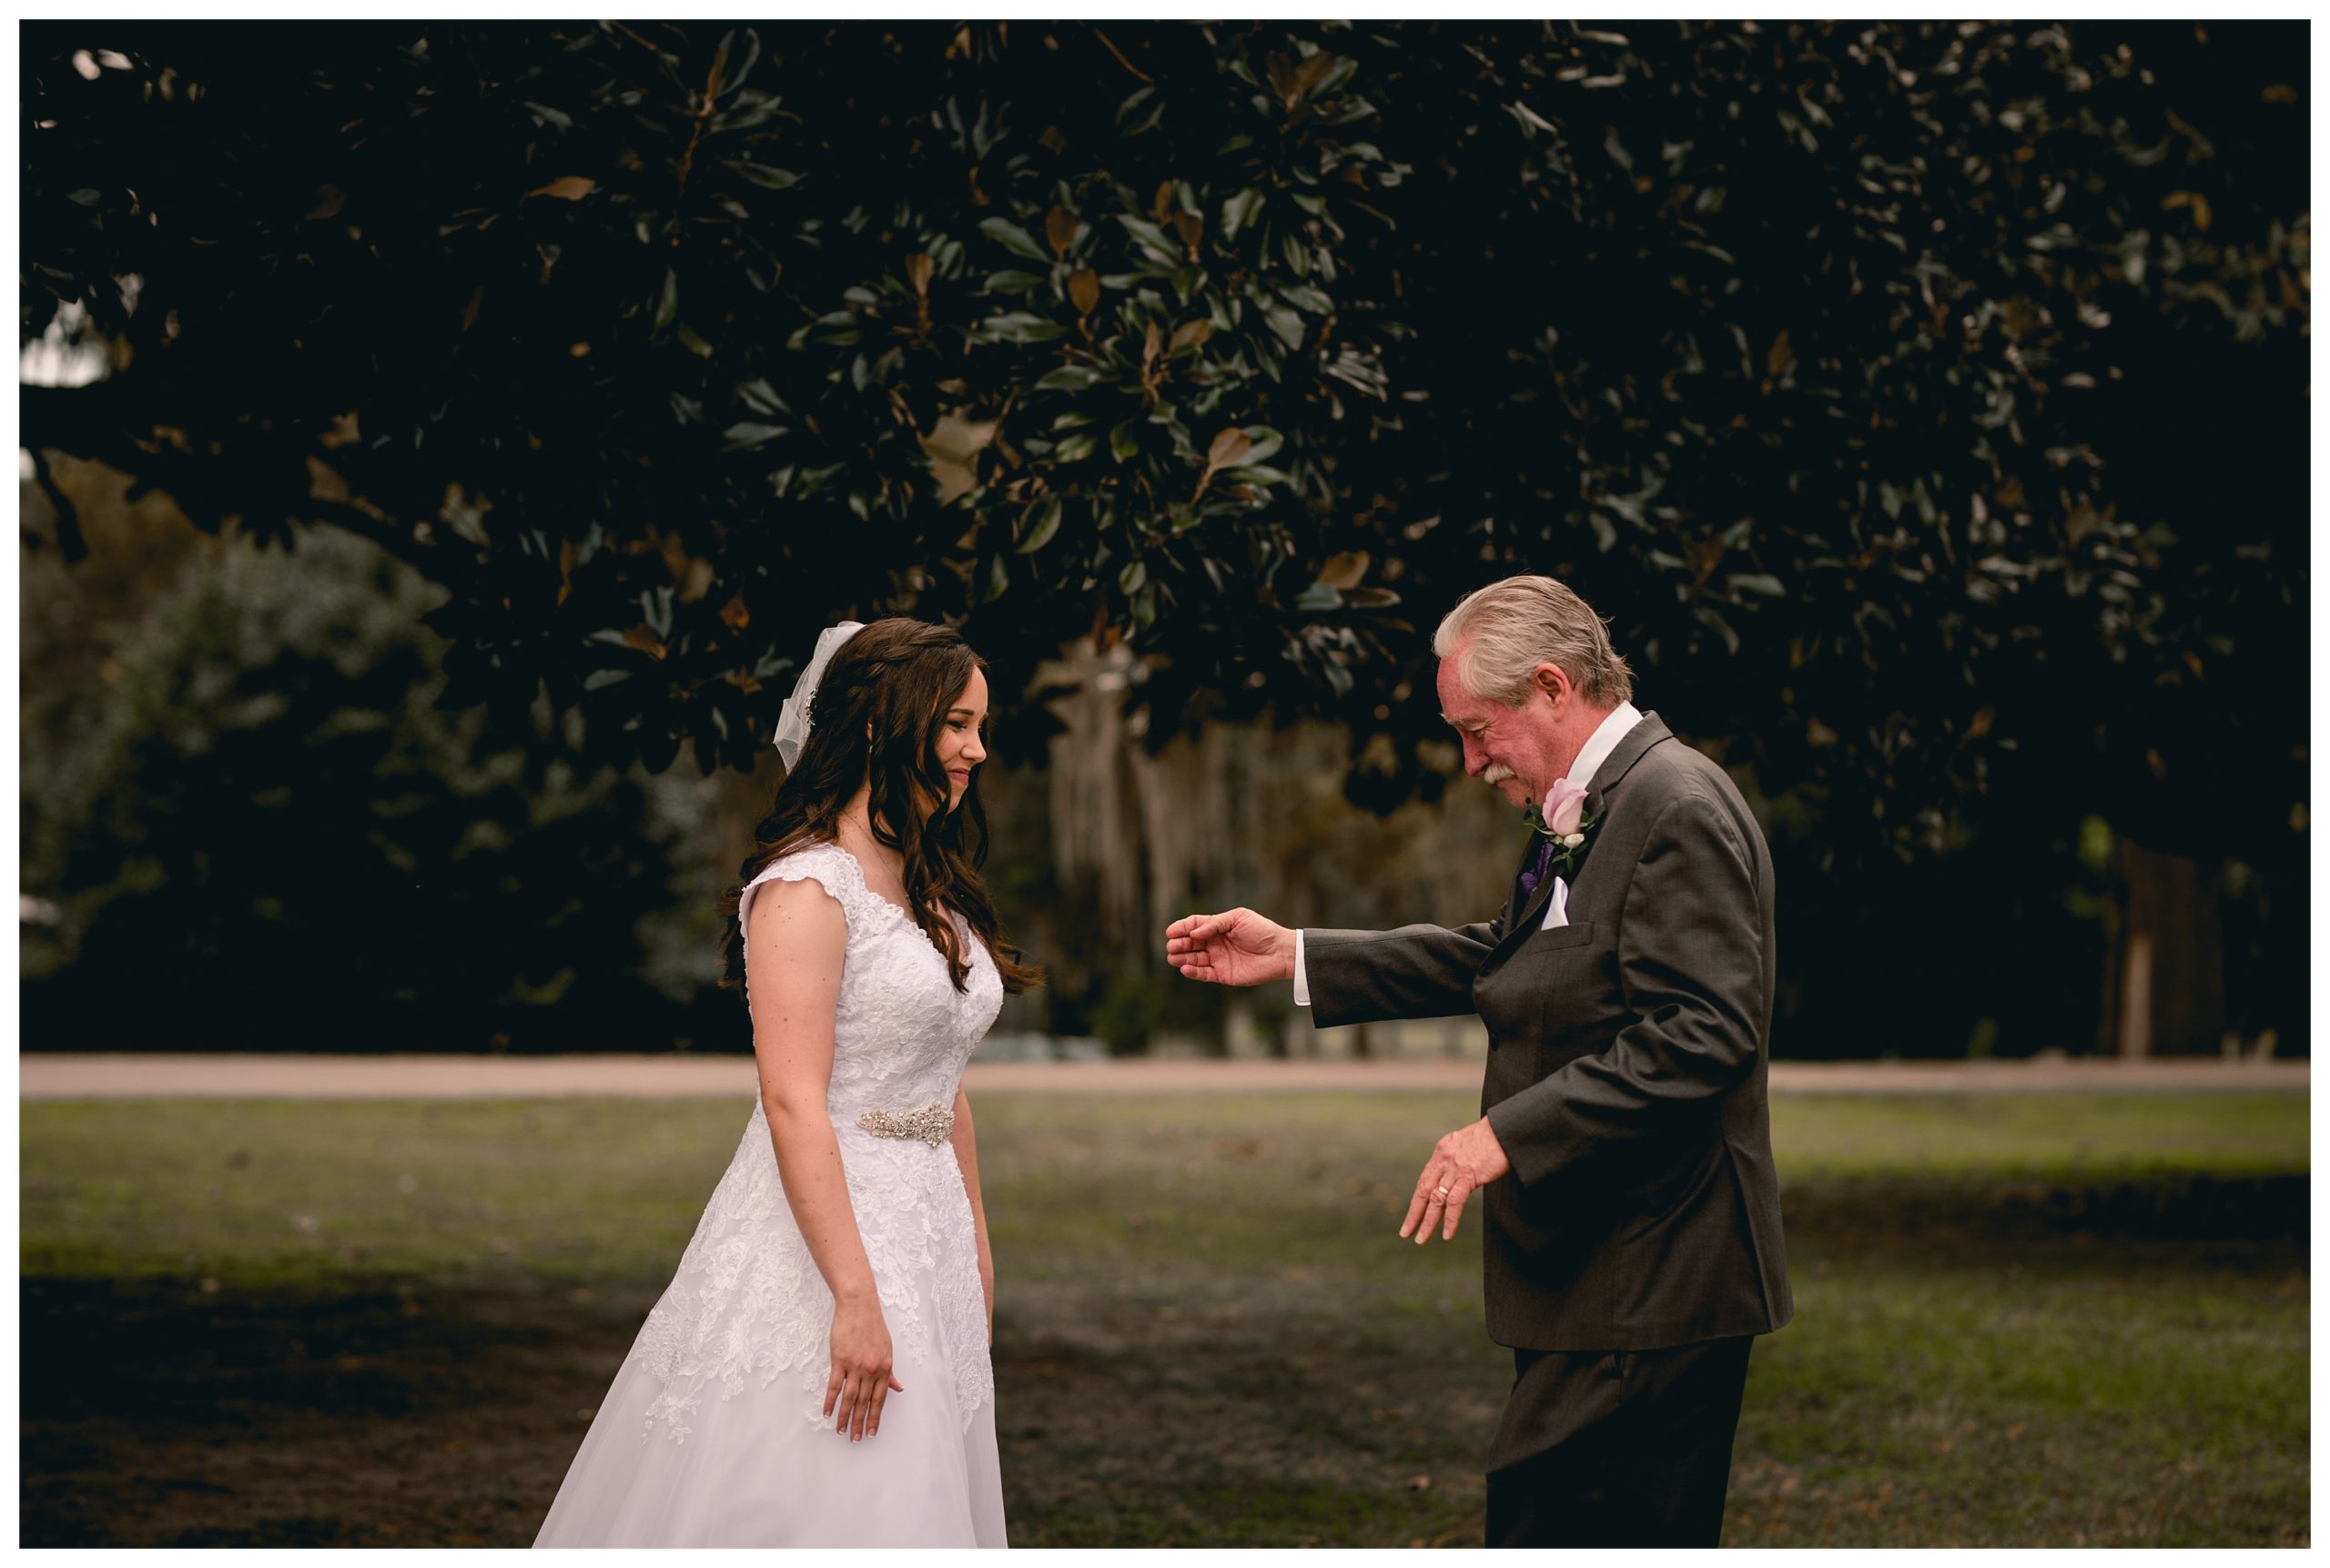 Favorite moments of wedding photography this past year by professional wedding photographer